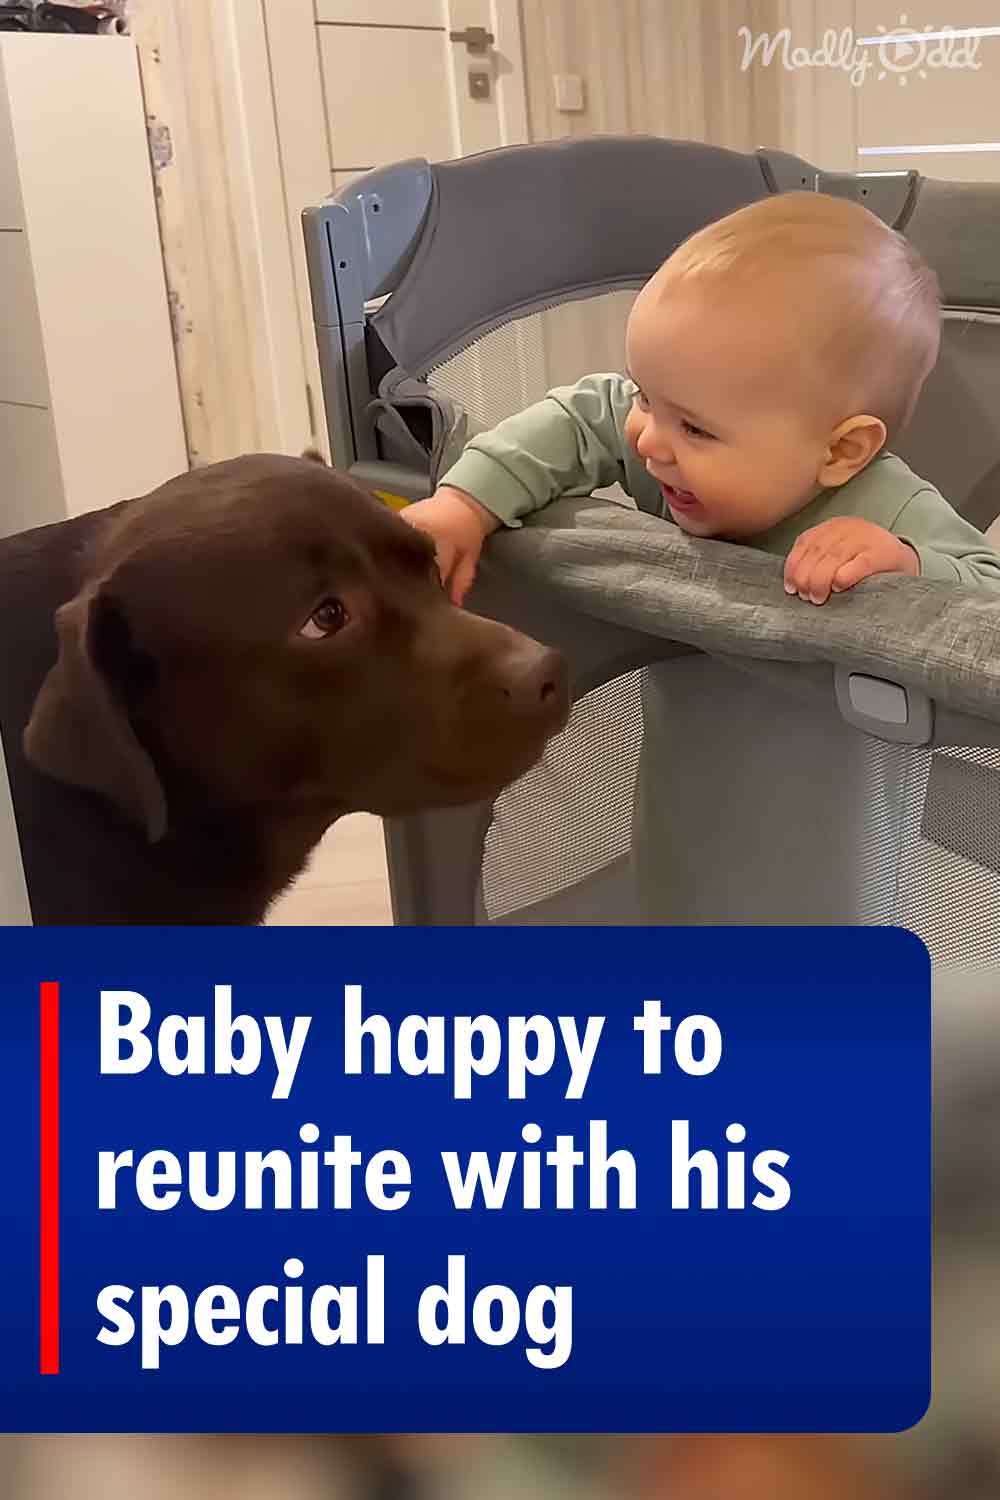 Baby happy to reunite with his special dog